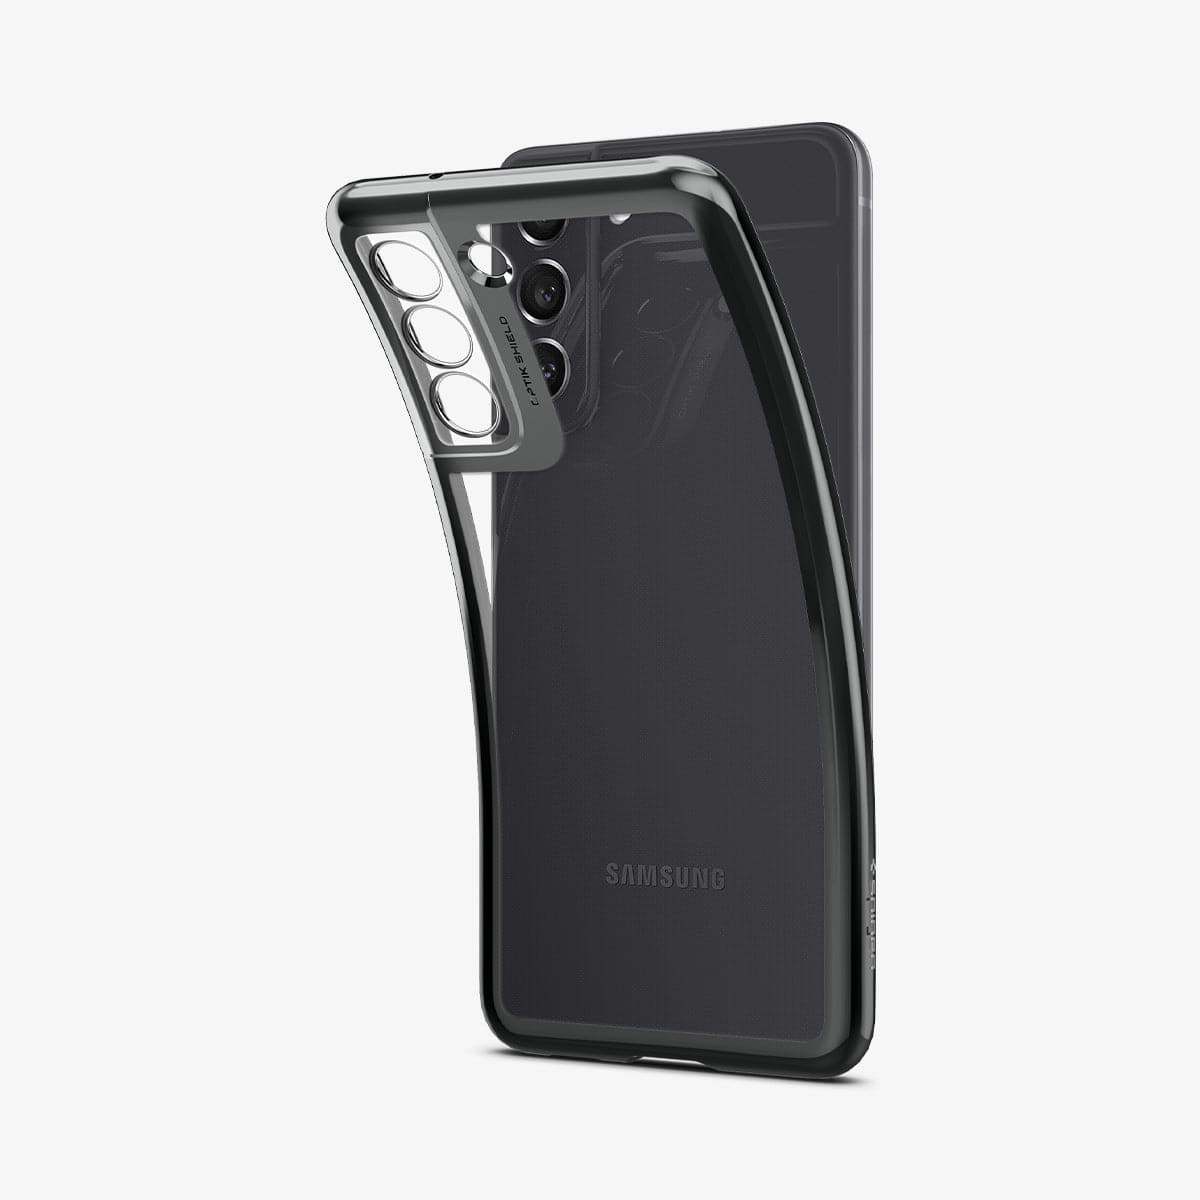 ACS03057 - Galaxy S21 FE Optik Crystal Case in chrome gray showing the back with case bending away from the device